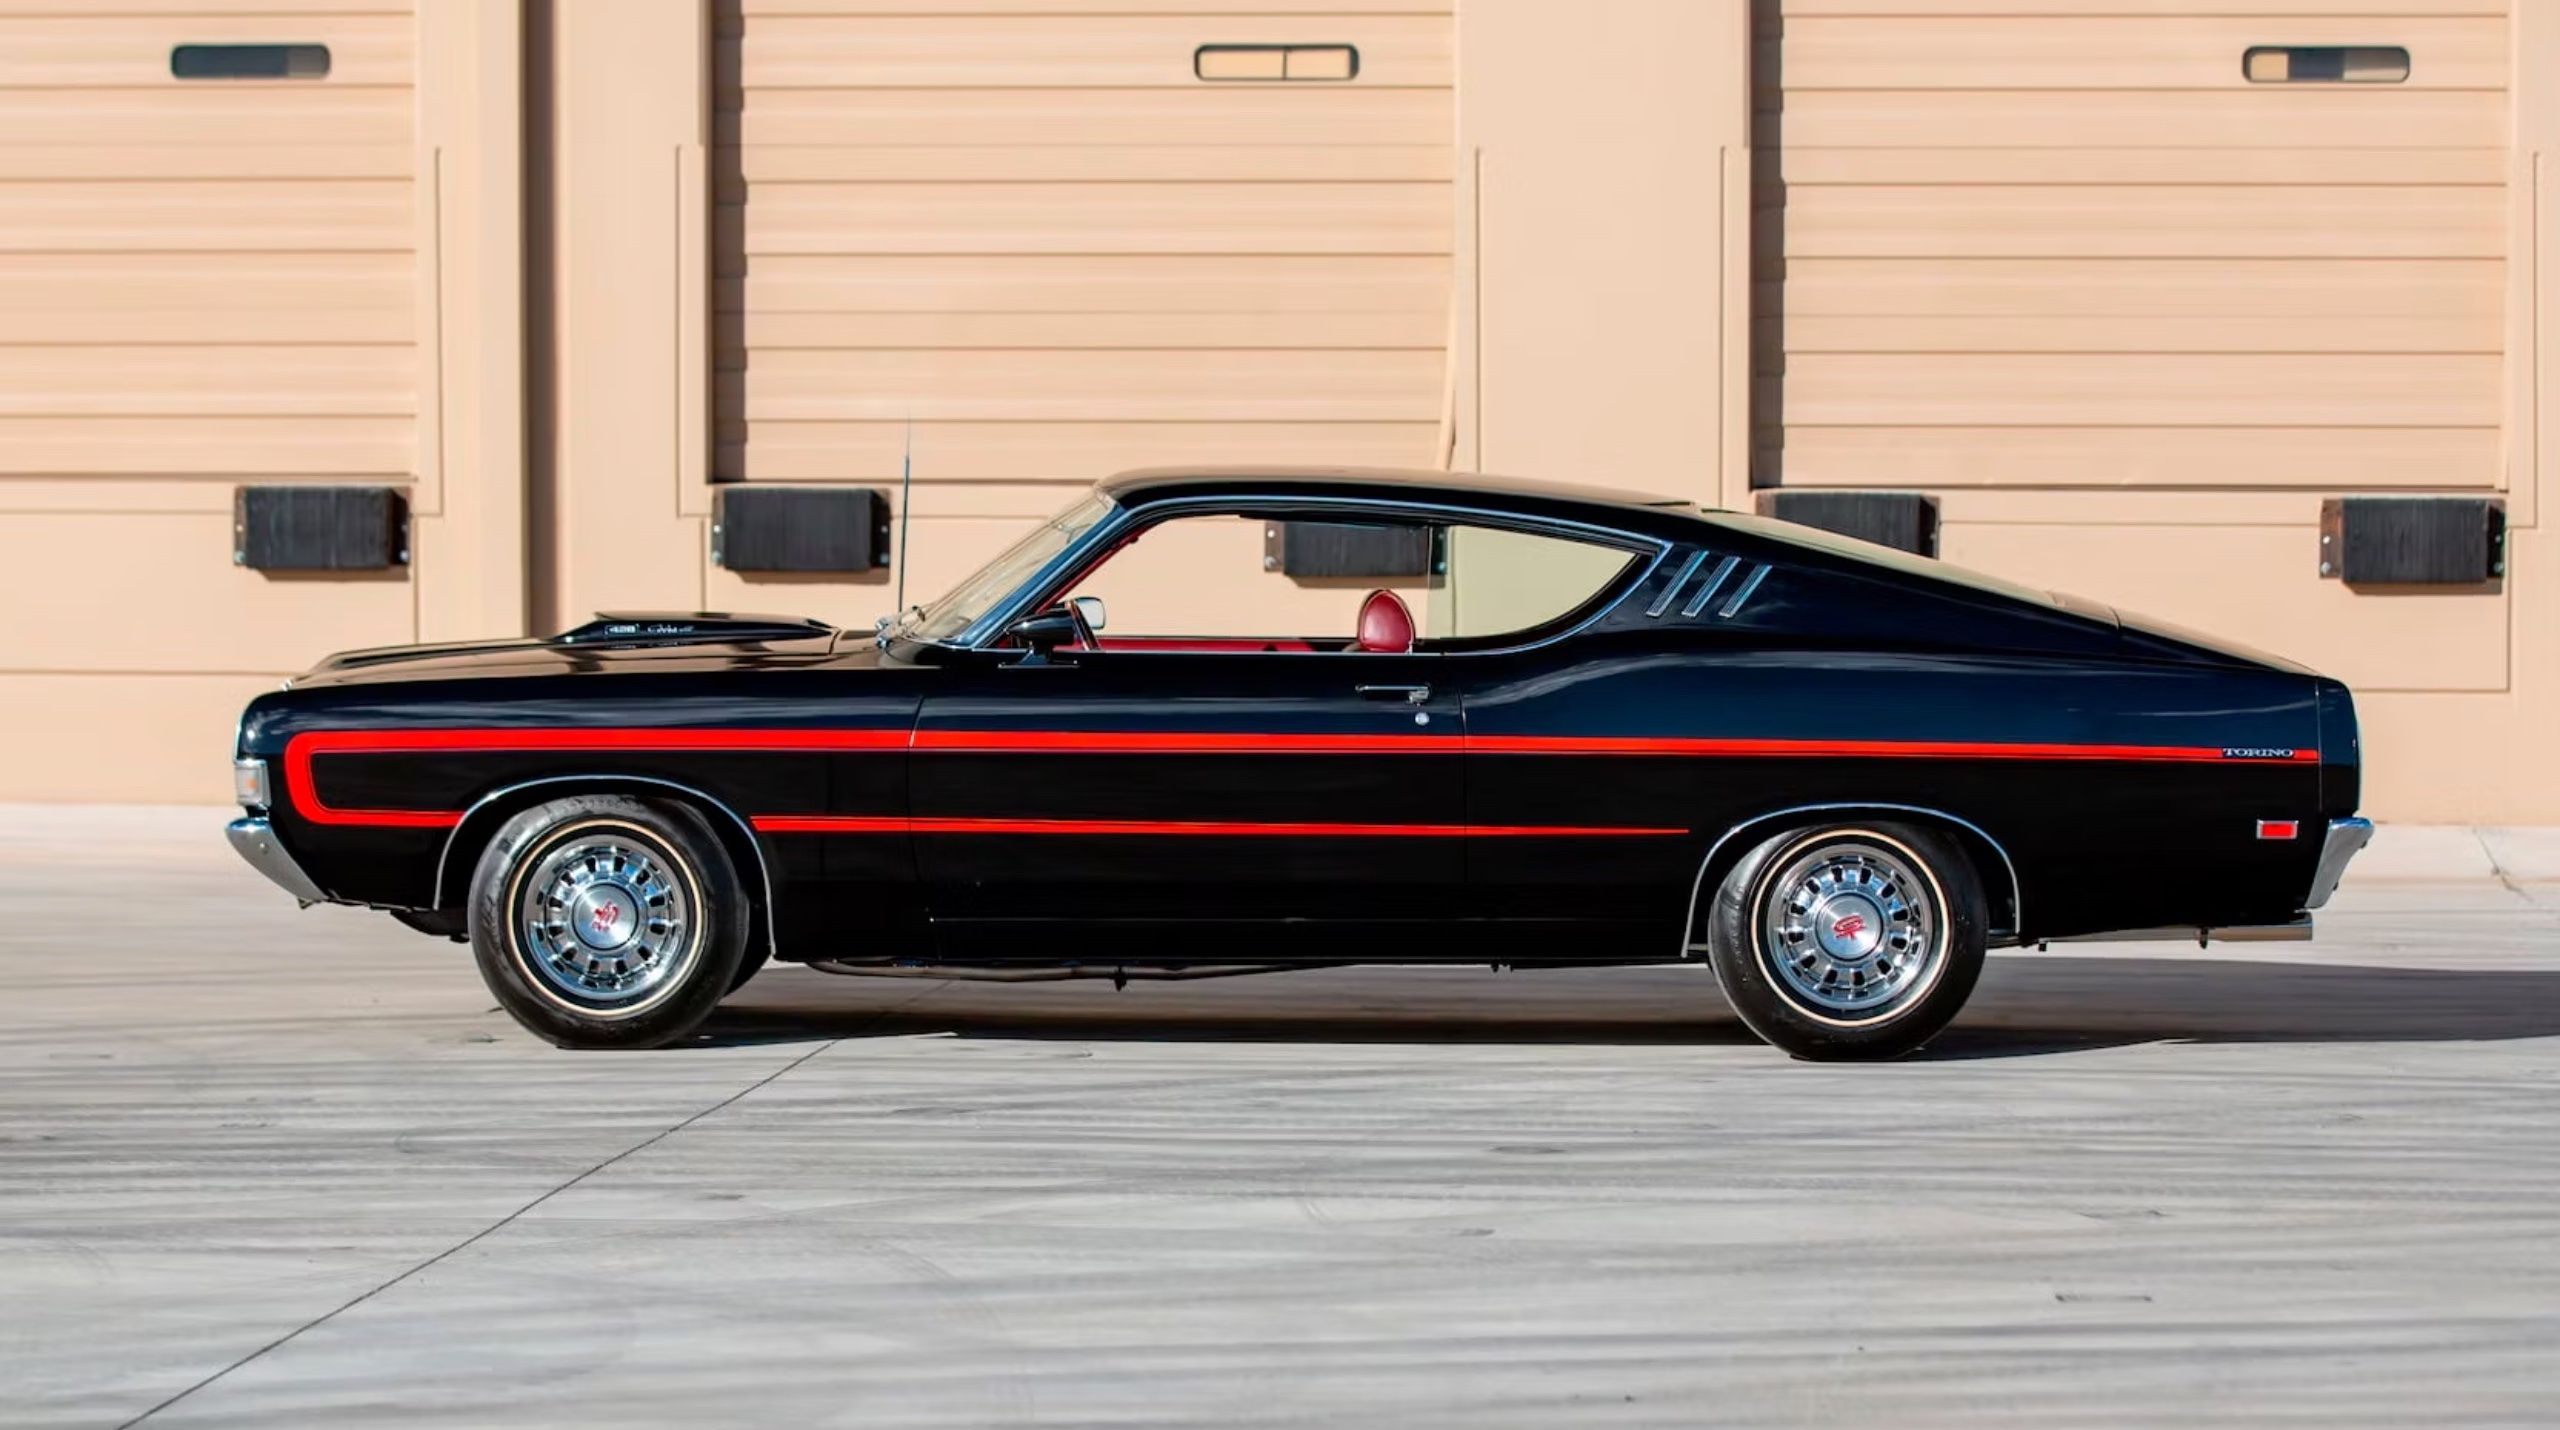 Black 1969 Ford Torino GT parked